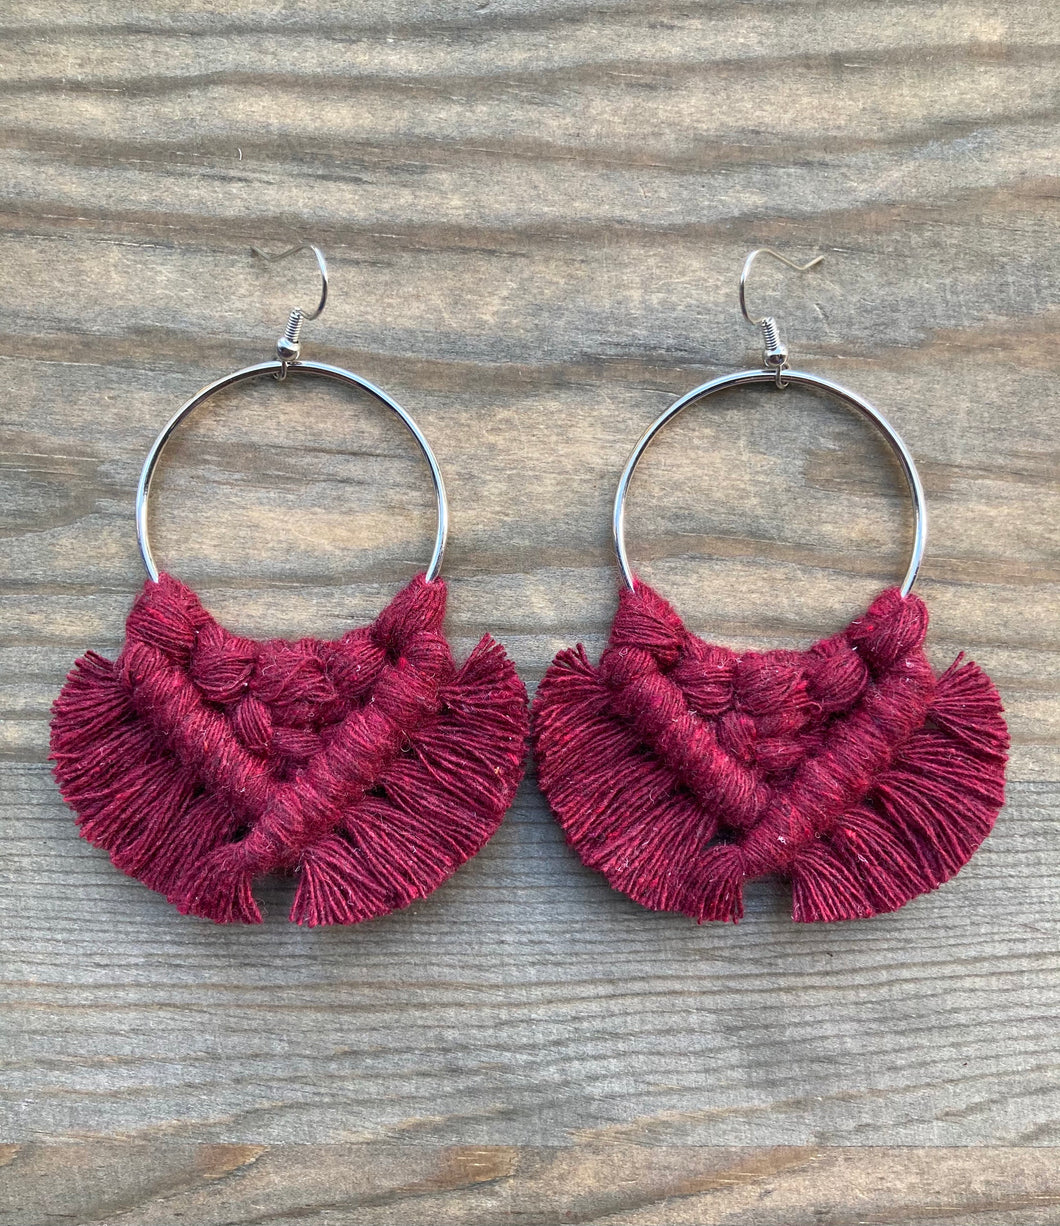 Large Square Knot Earrings - Burgundy & Silver